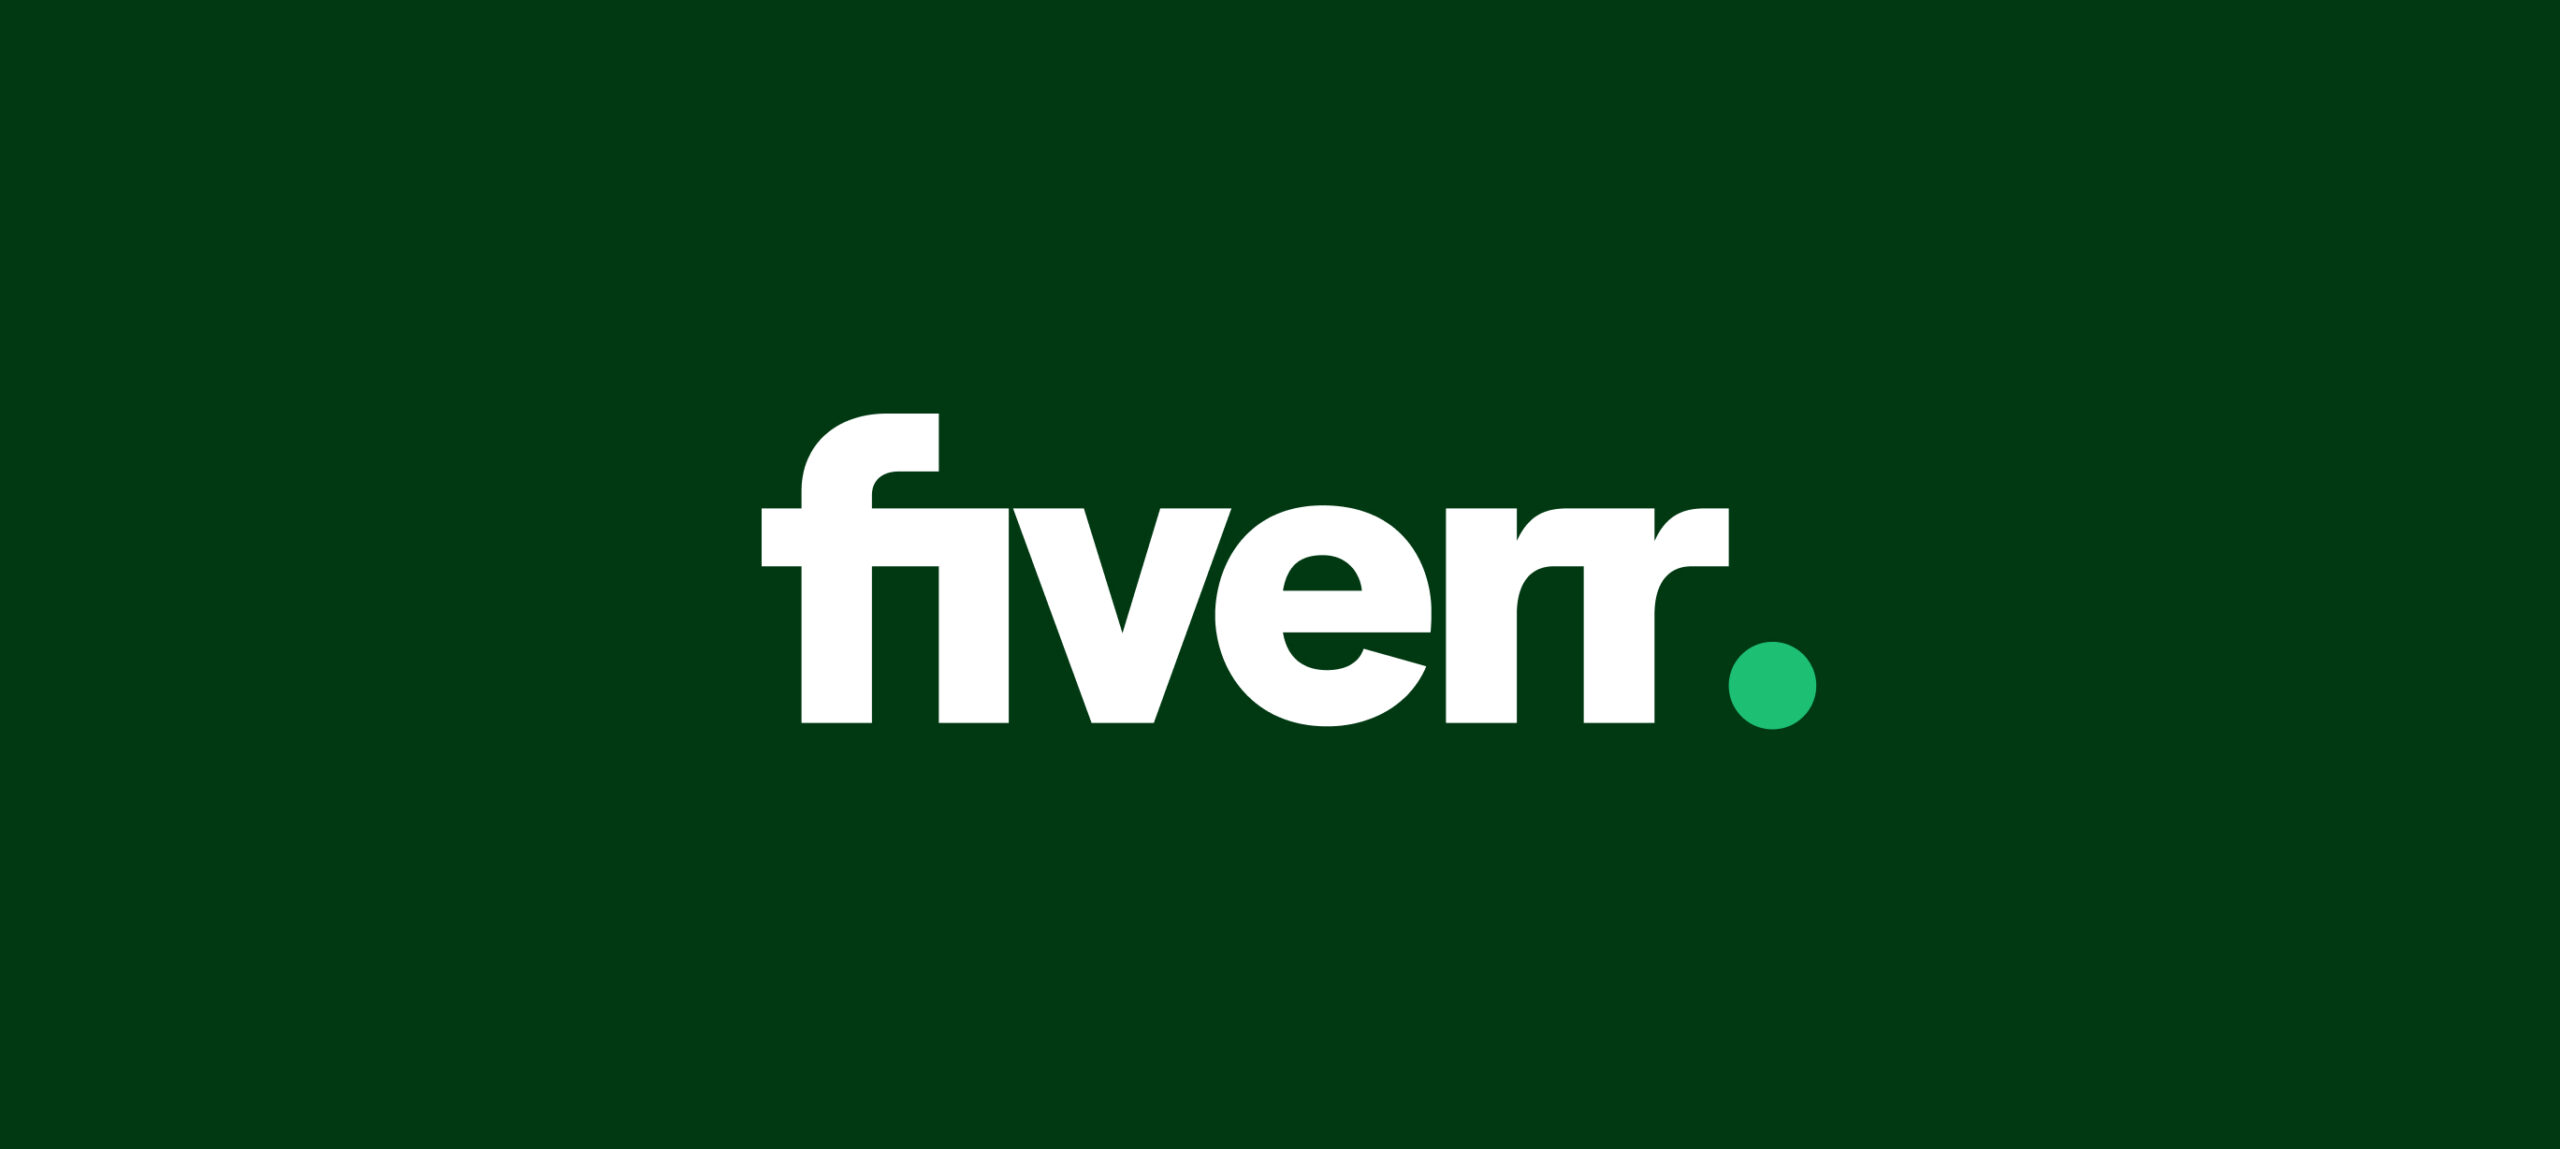 Fiverr Promo Code - 50% Off Discount & Coupon Code